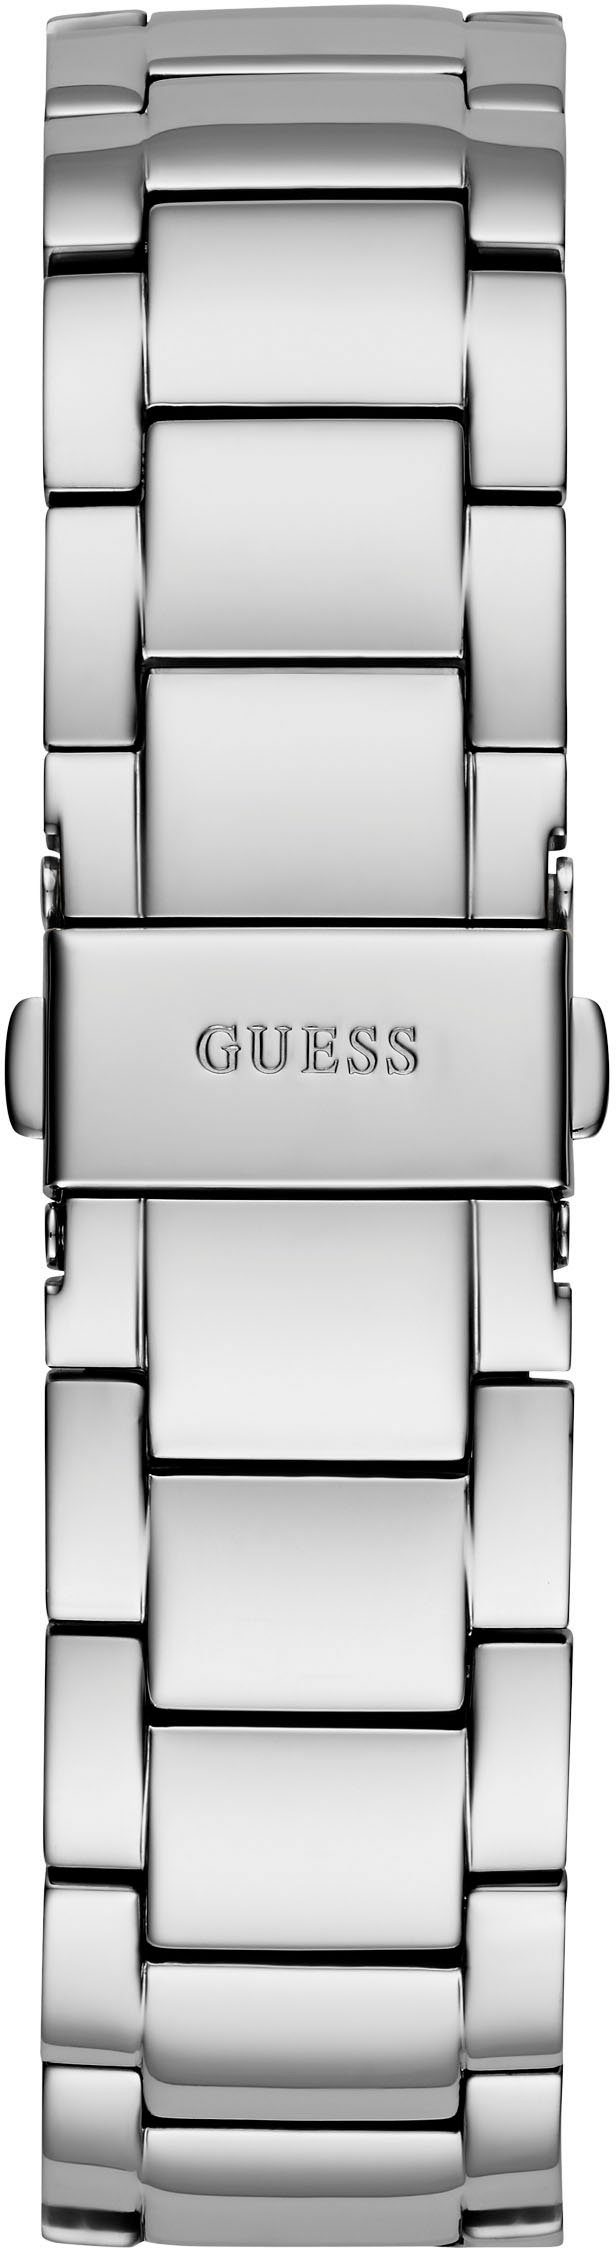 Multifunktionsuhr Guess GW0517G1